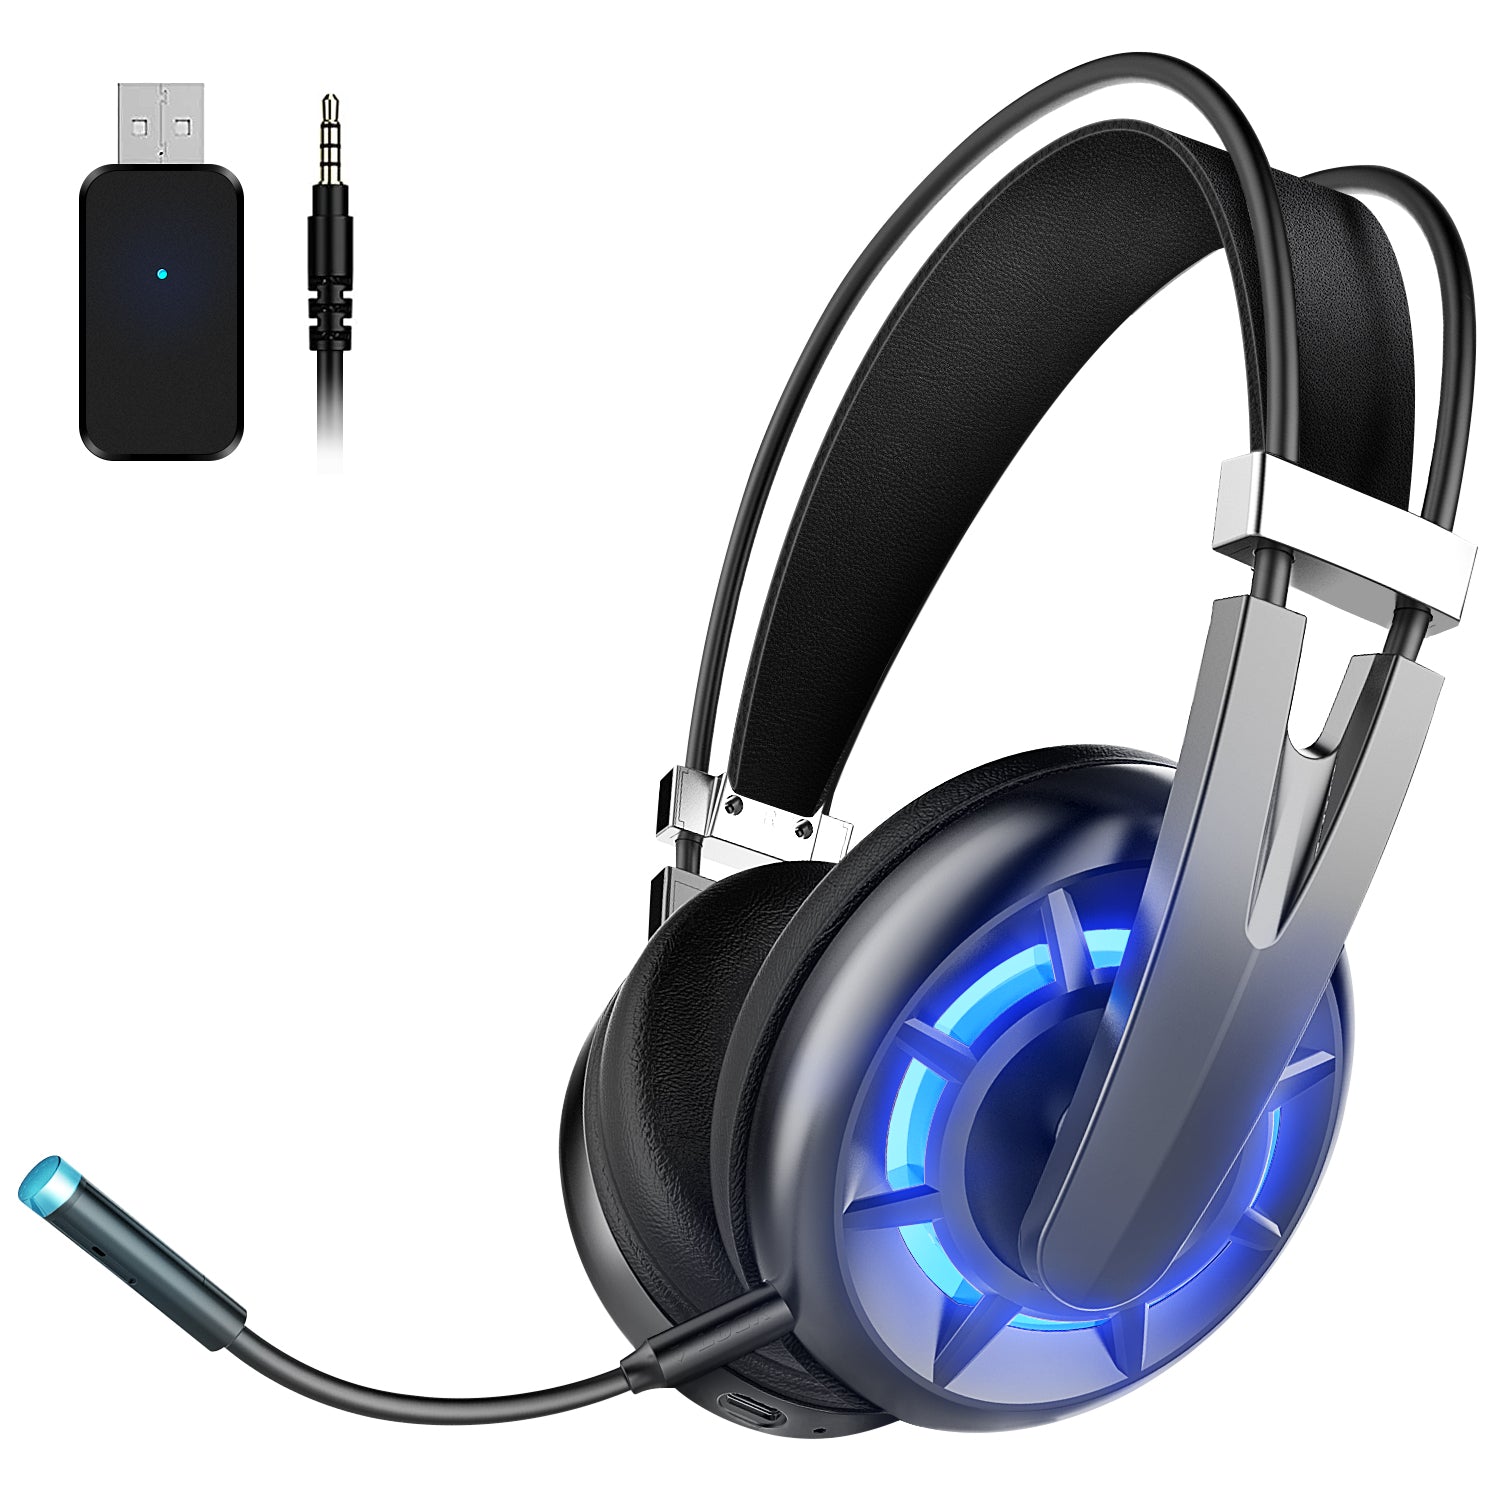 WINTORY Air 2.4G Headset for PS4 PC TV Wireless Gaming Headphones Wintory